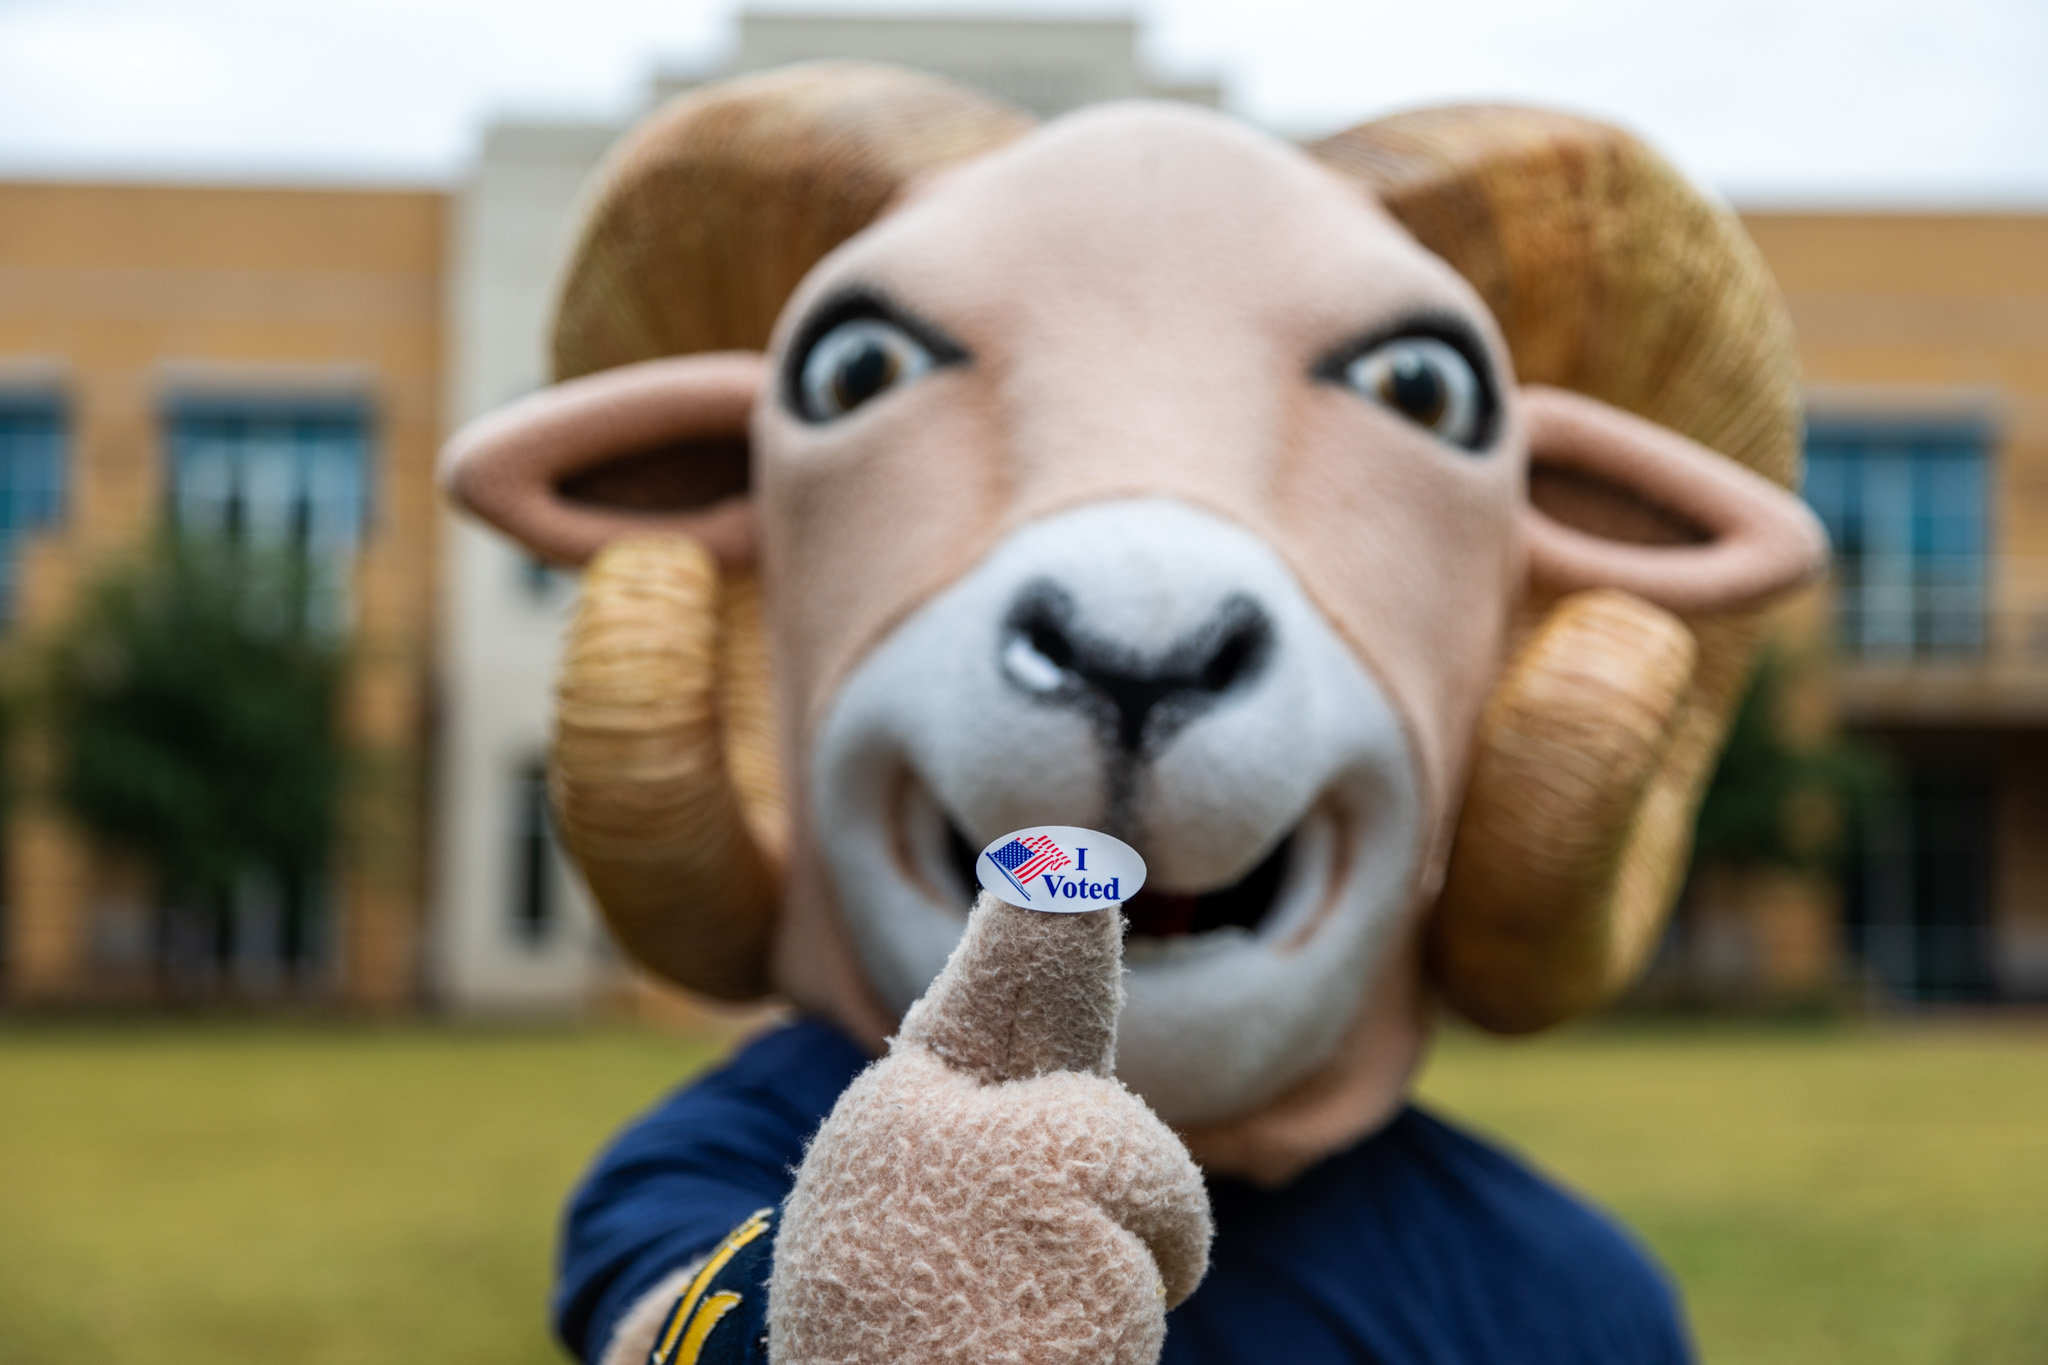 Willie the Ram holding an I voted sticker